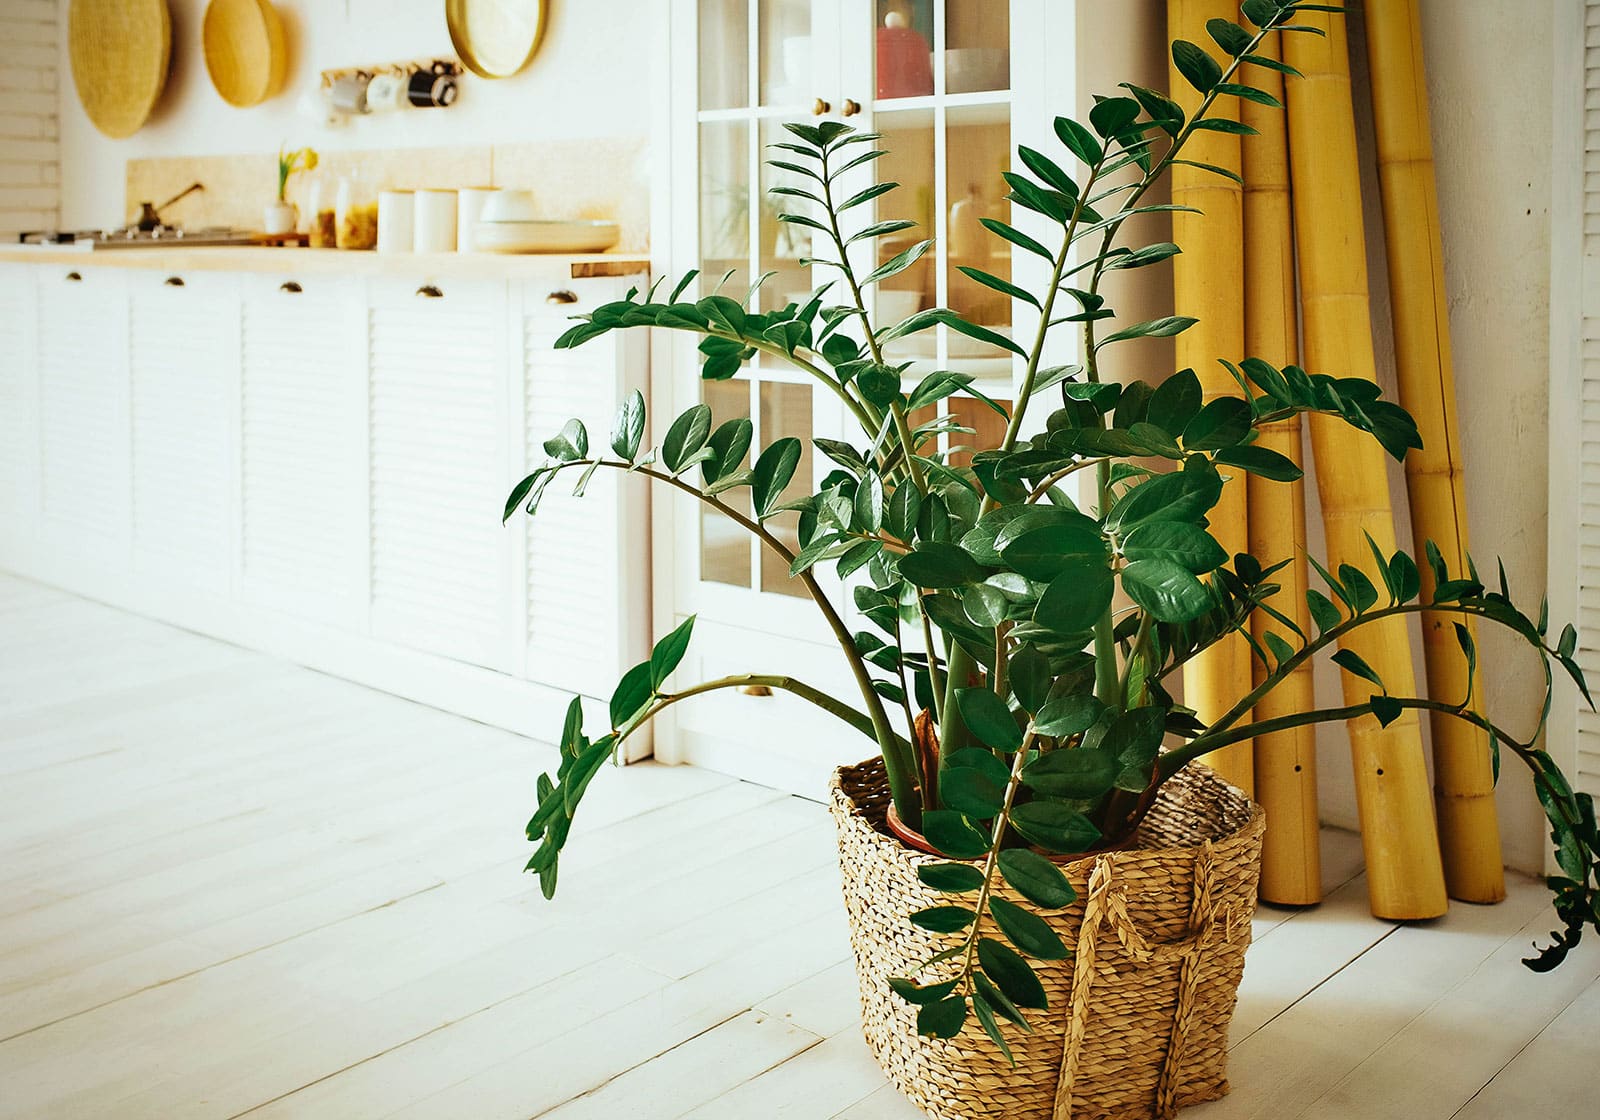 ZZ plant in a rattan basket in a bright white rustic kitchen